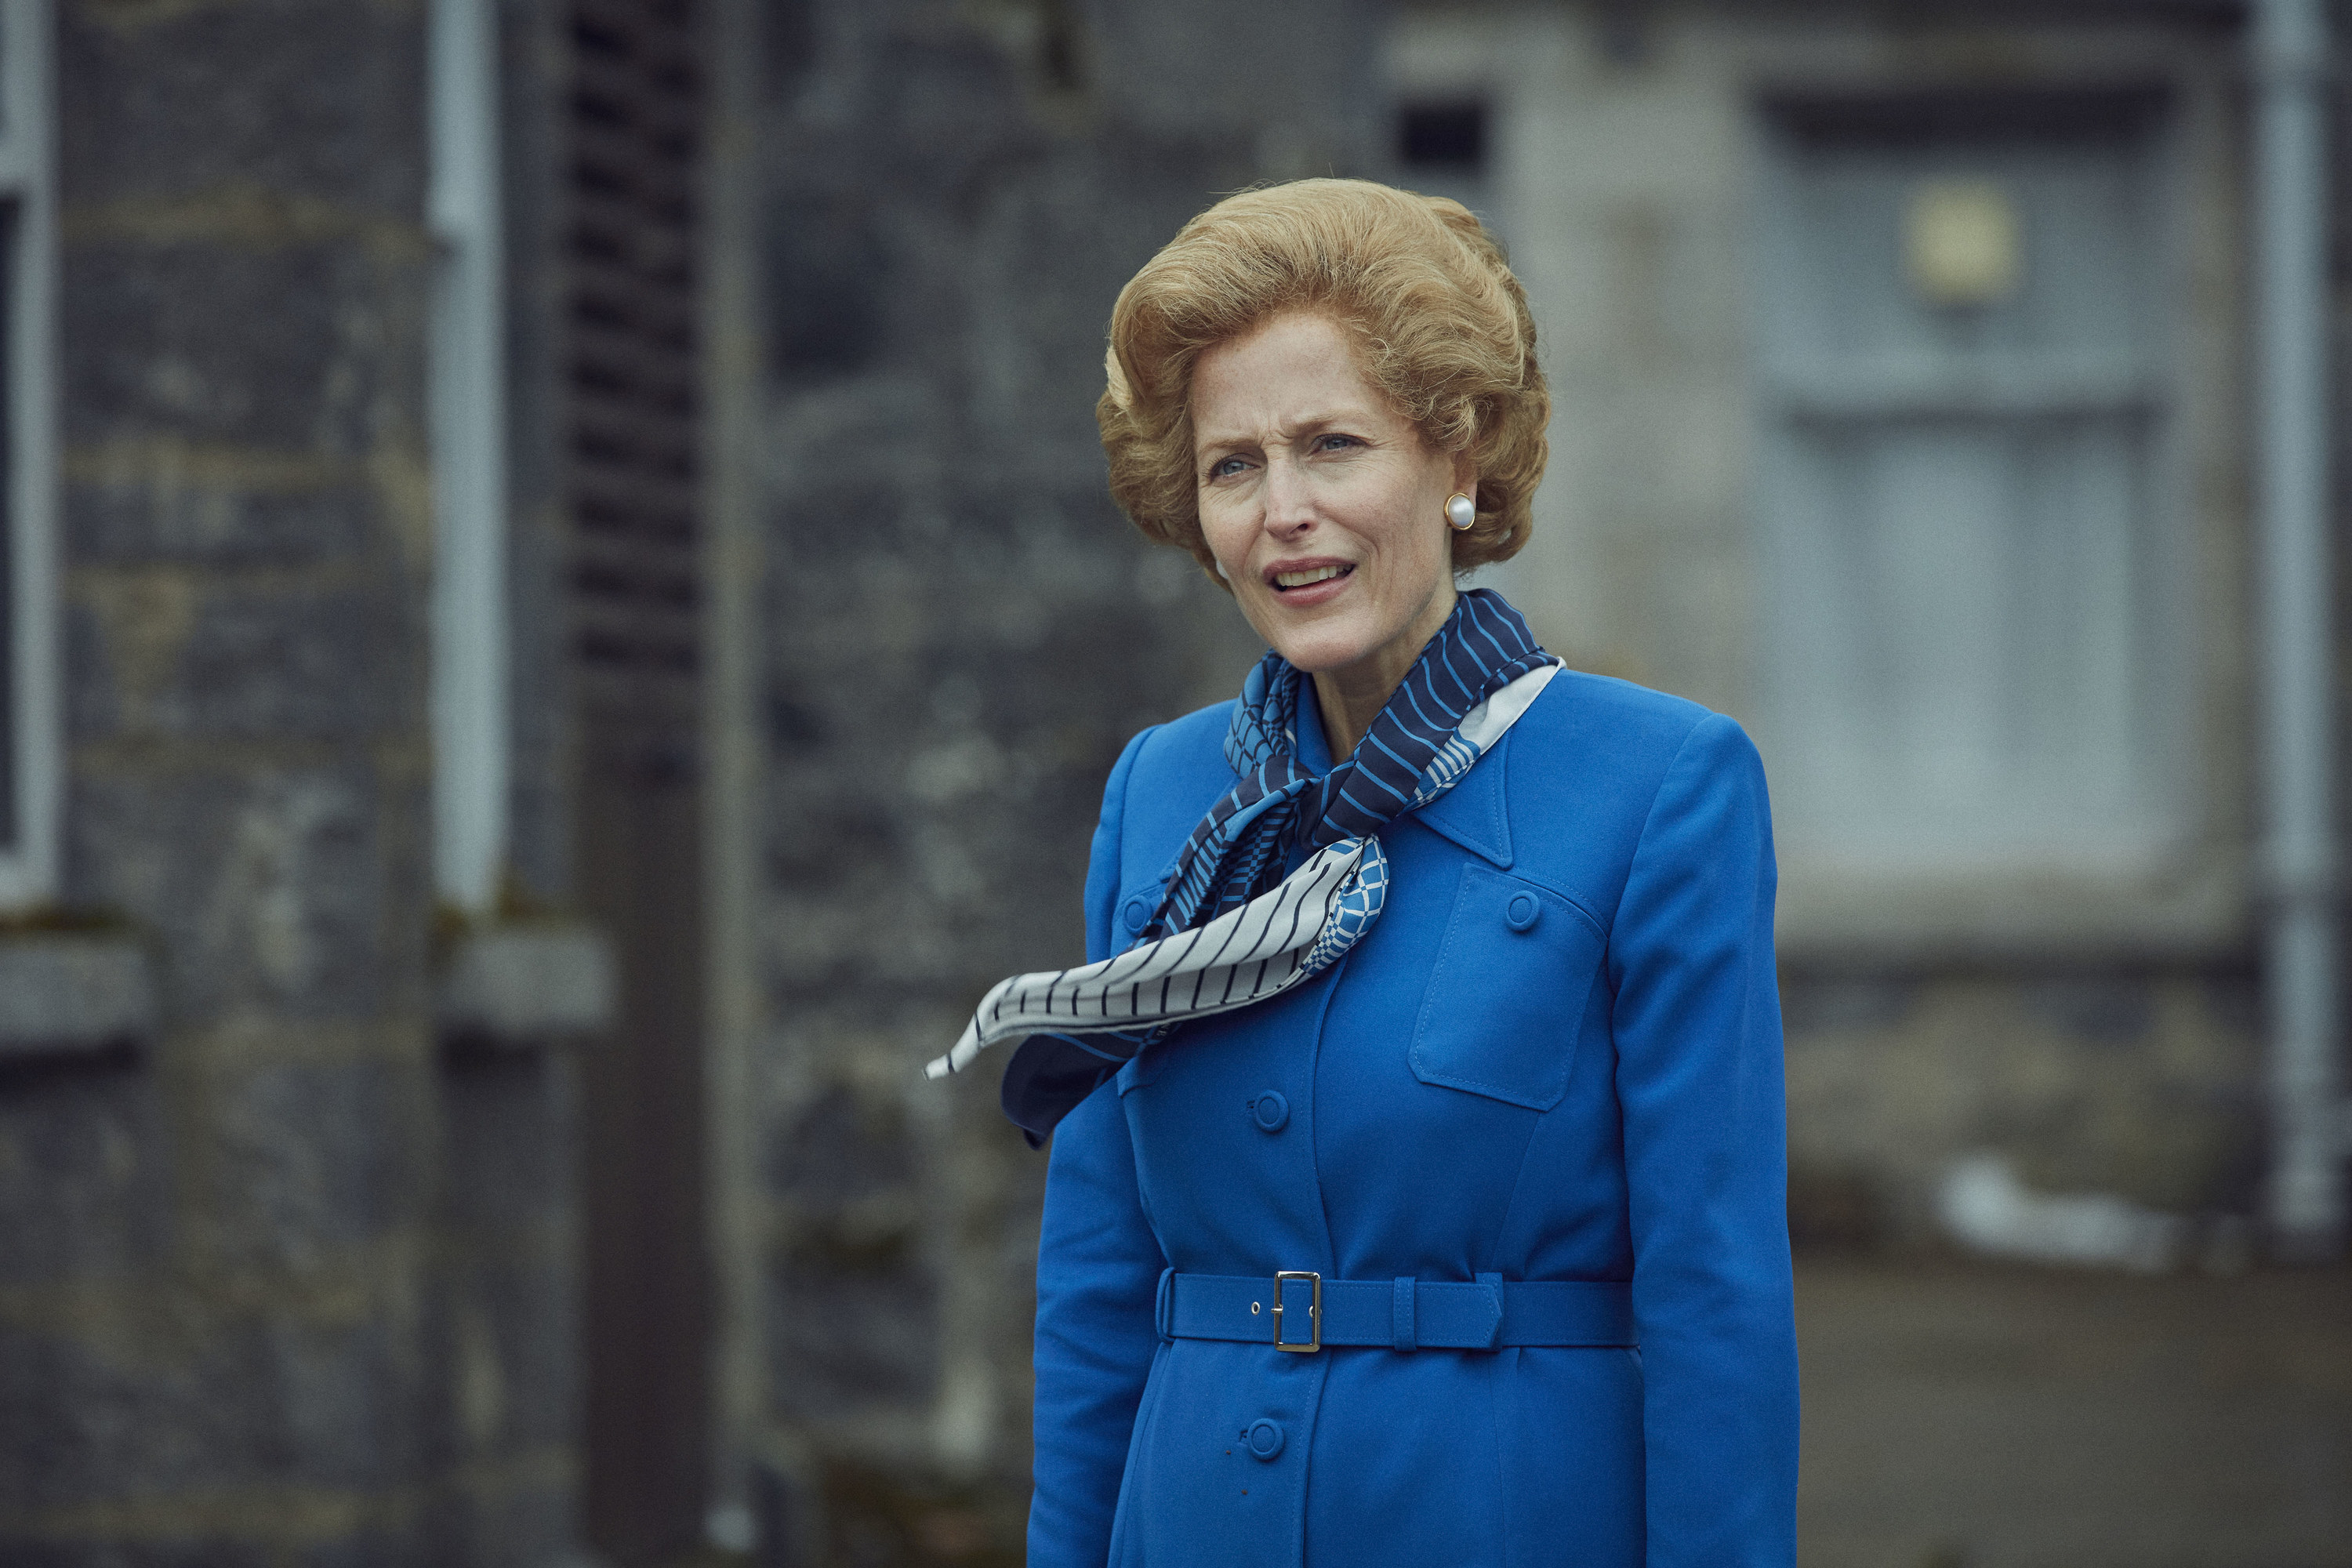 A still shot of Gillian Anderson, who plays Margaret Thatcher in season 4 of &quot;The Crown.&quot;